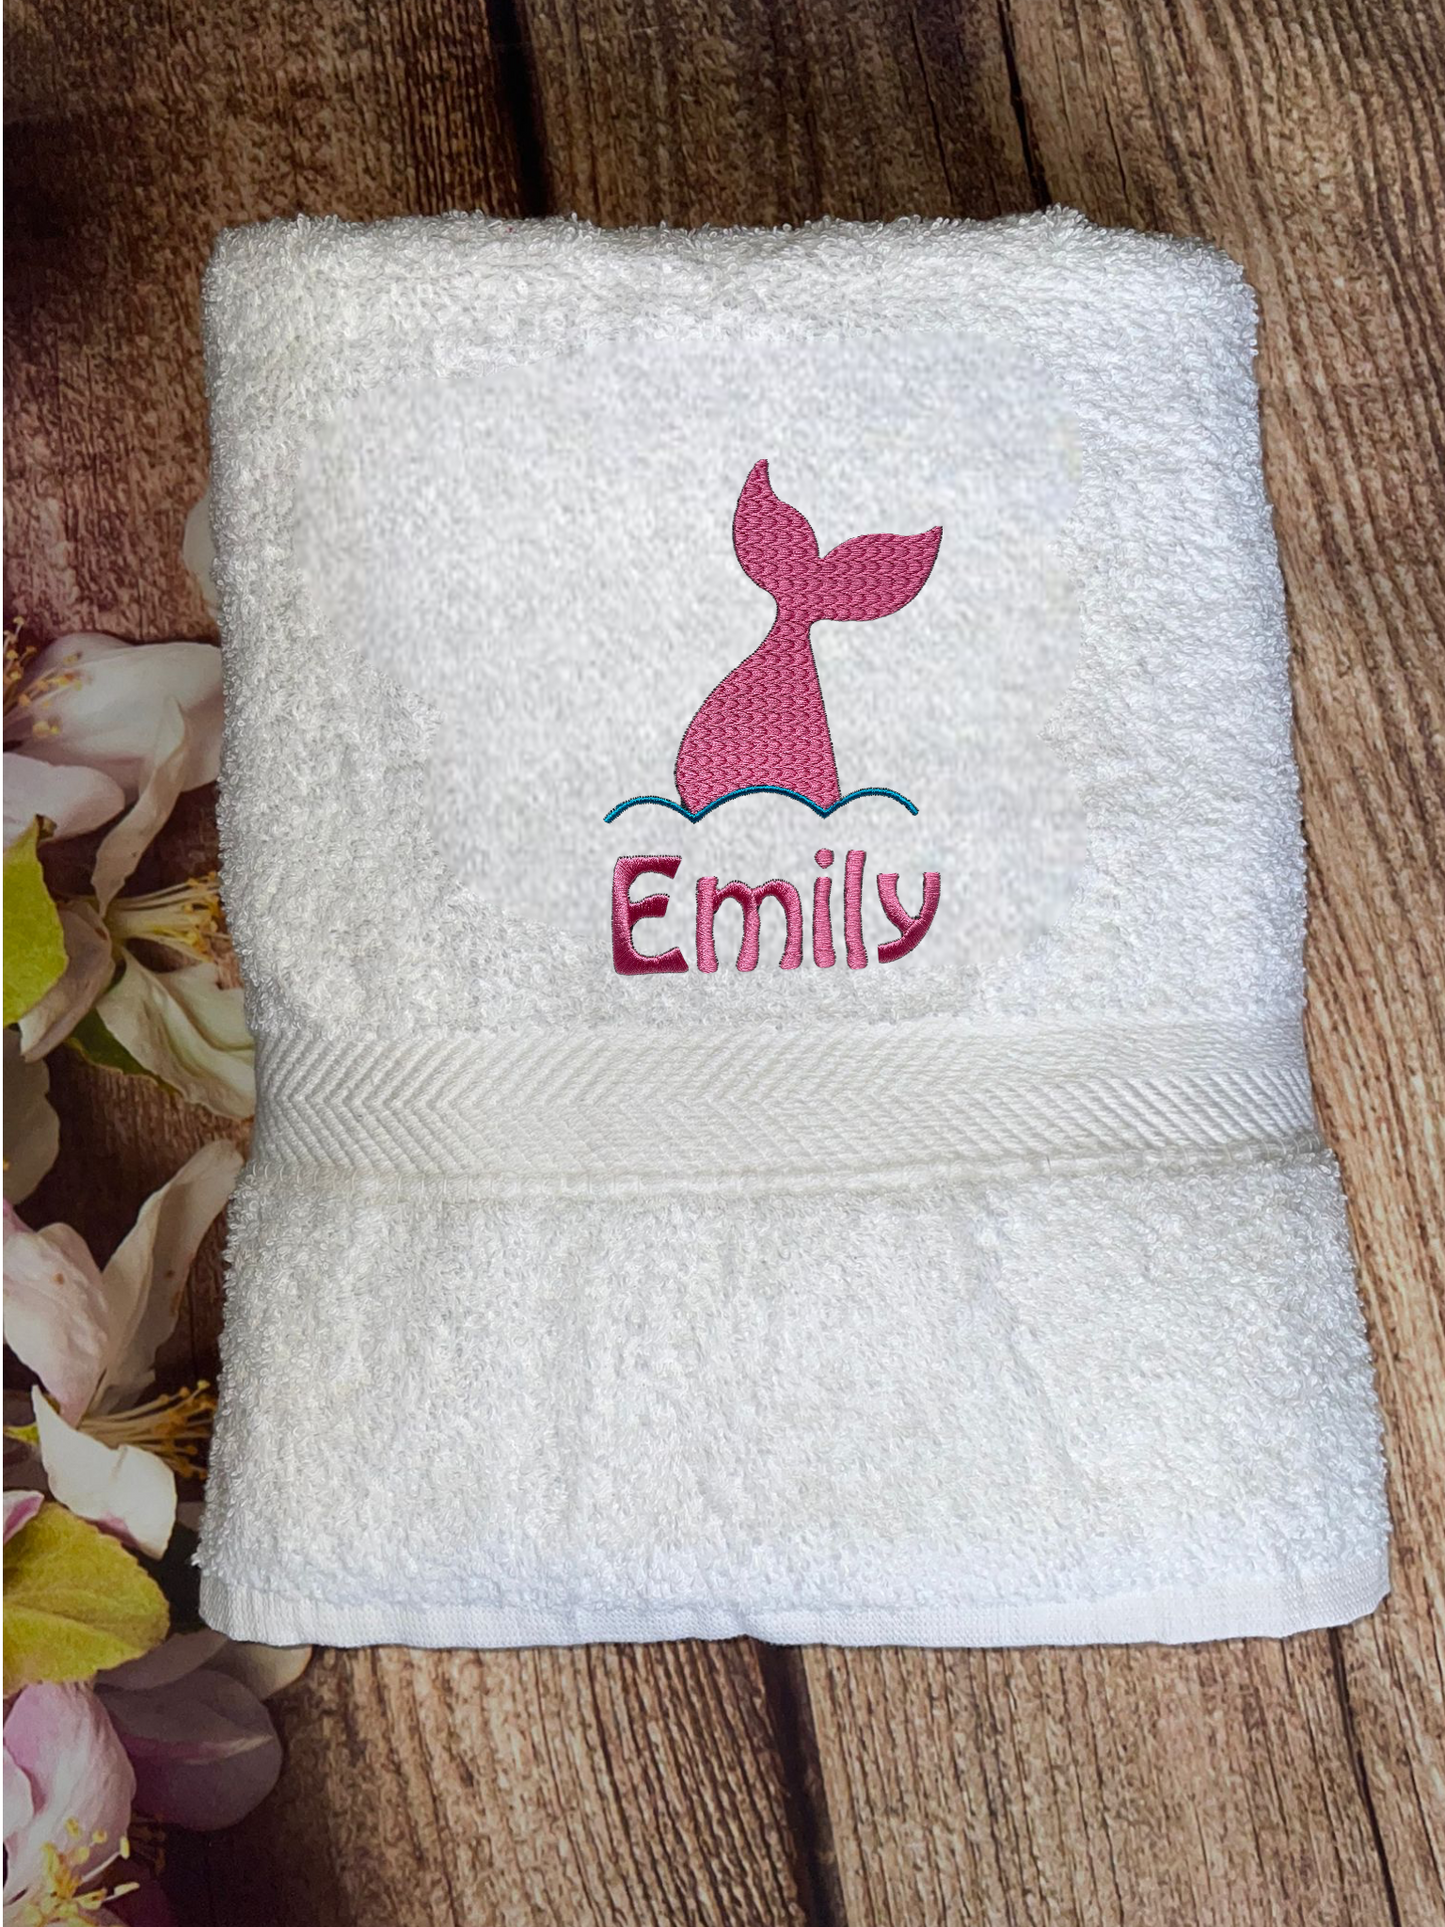 Embroidered Personalised Swimming, beach or Sports Towel. Ideal gift - Mermaid